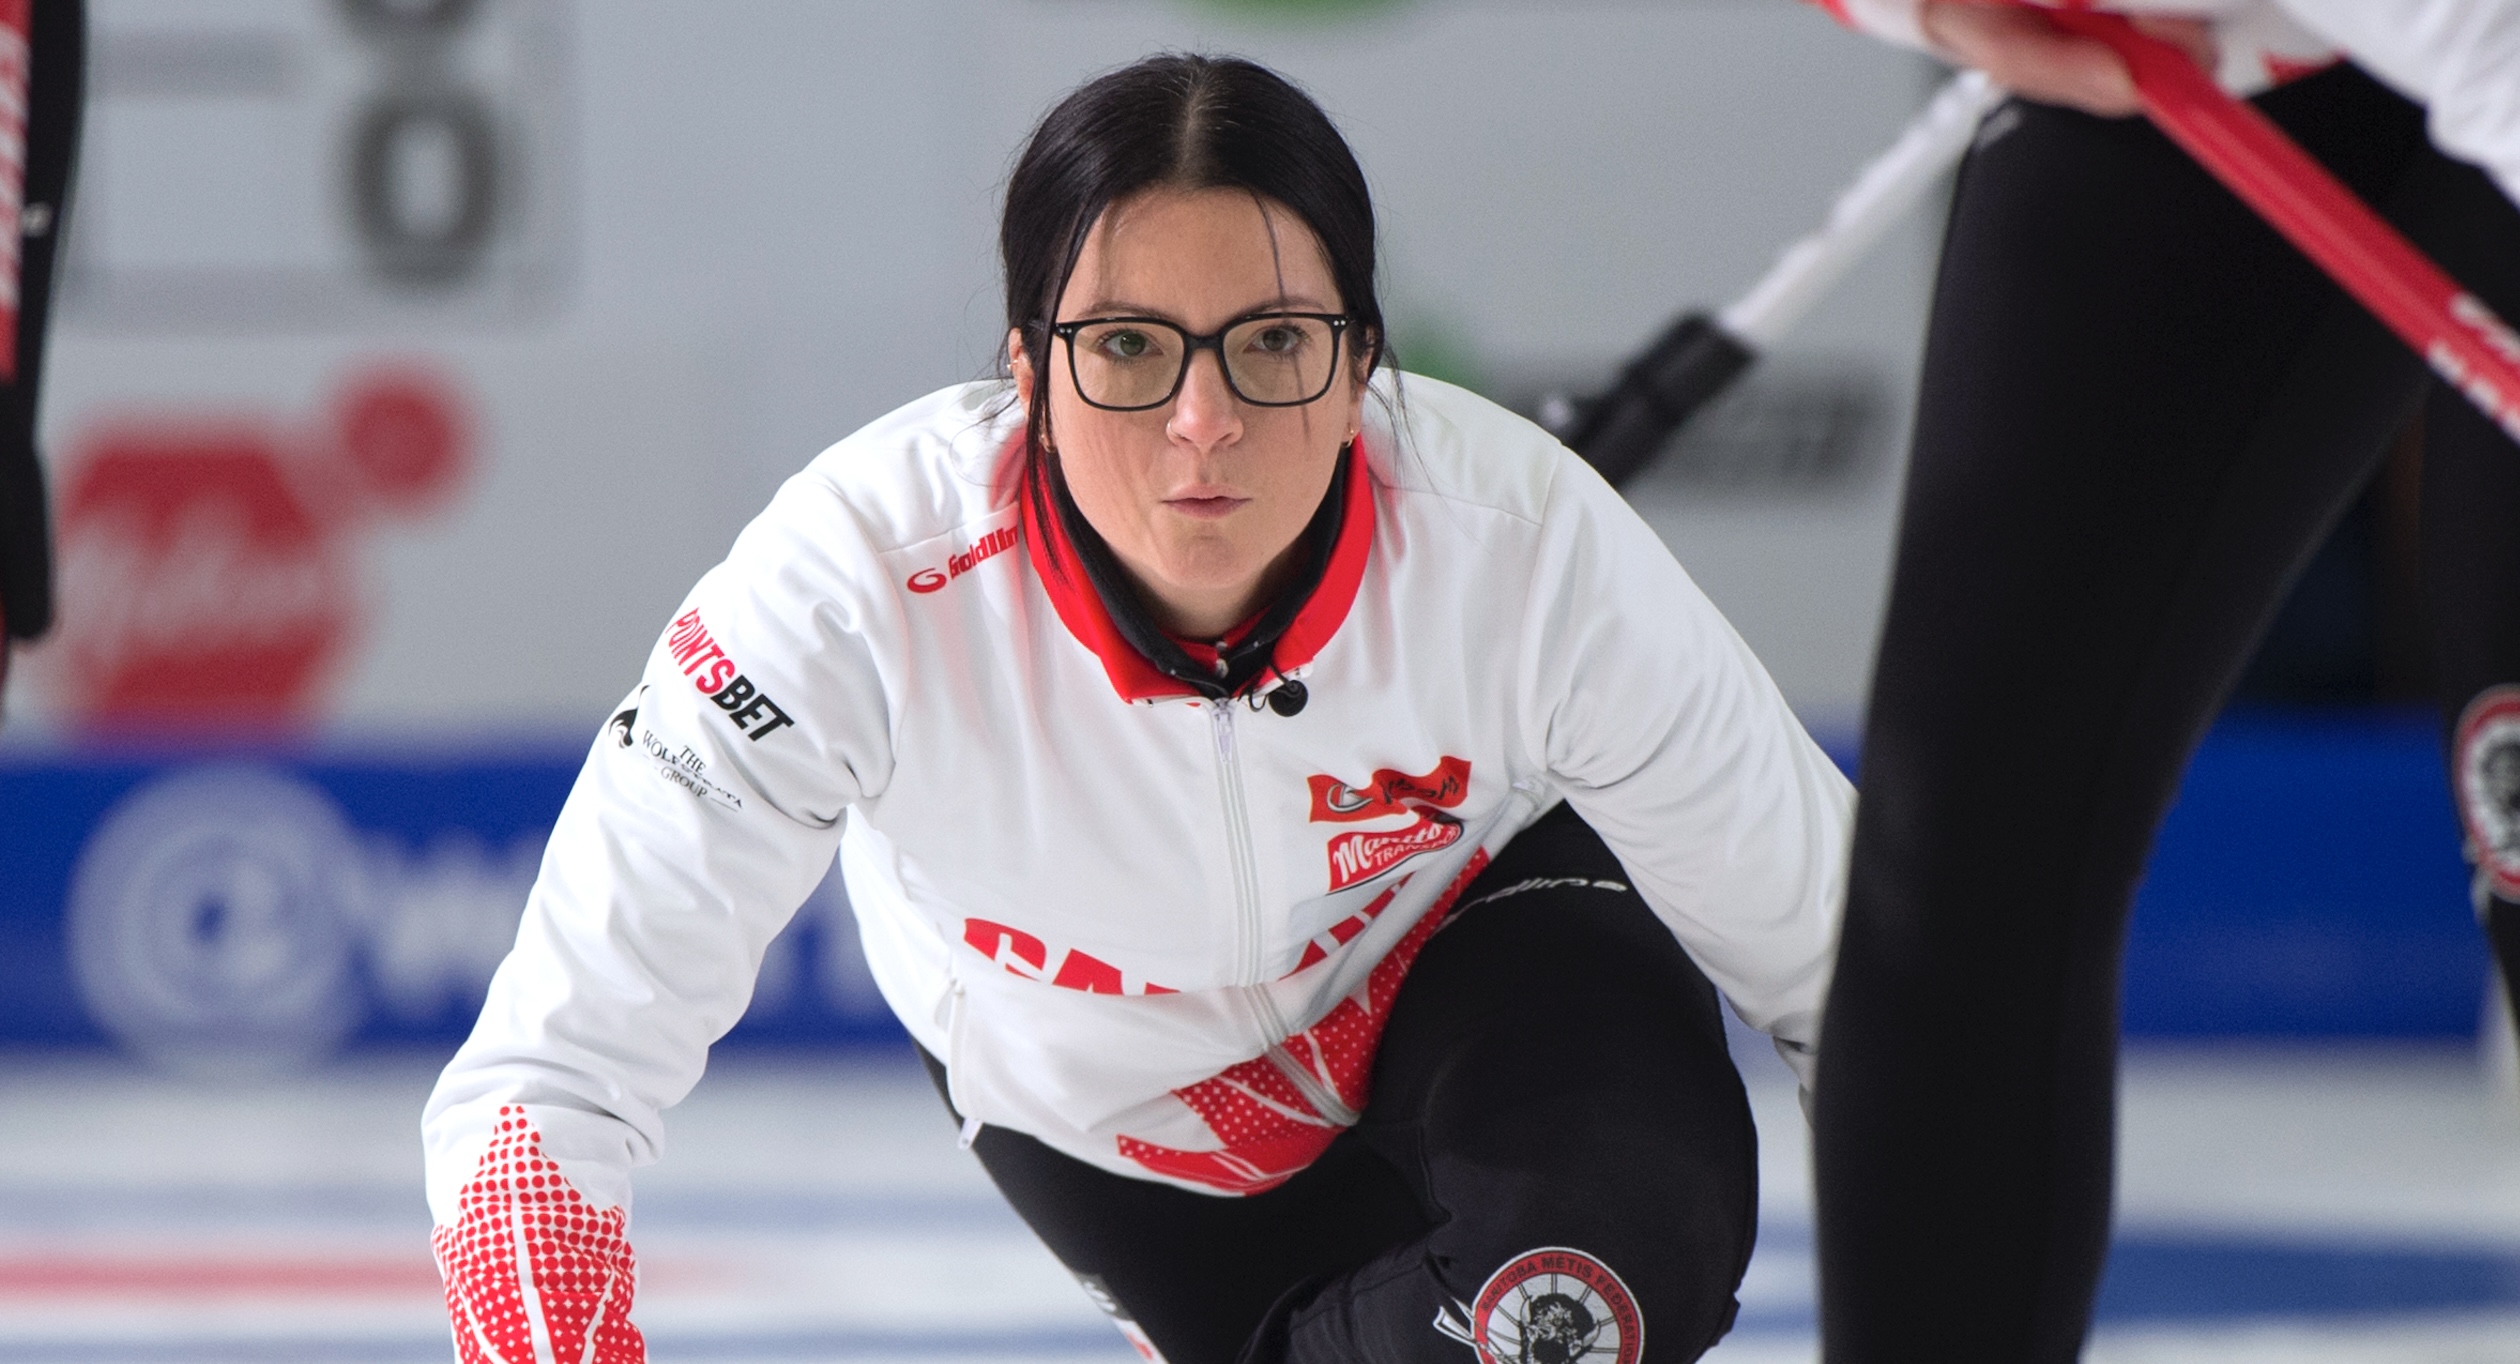 Bronze Games “Getting Old” for Einarson - The Curling News